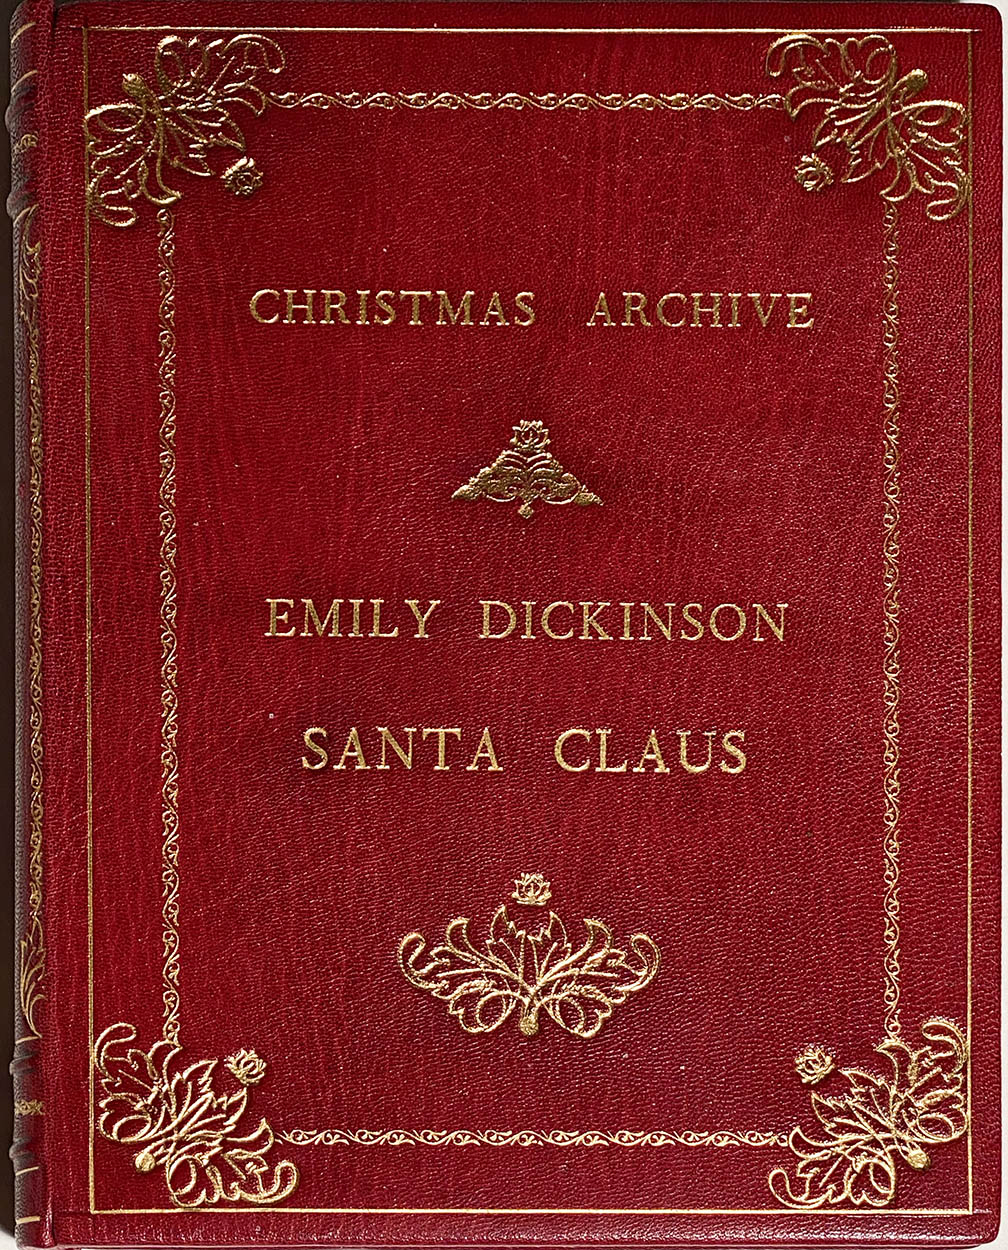 Emily Dickinson's handwritten manuscript poem about Santa is up for sale.